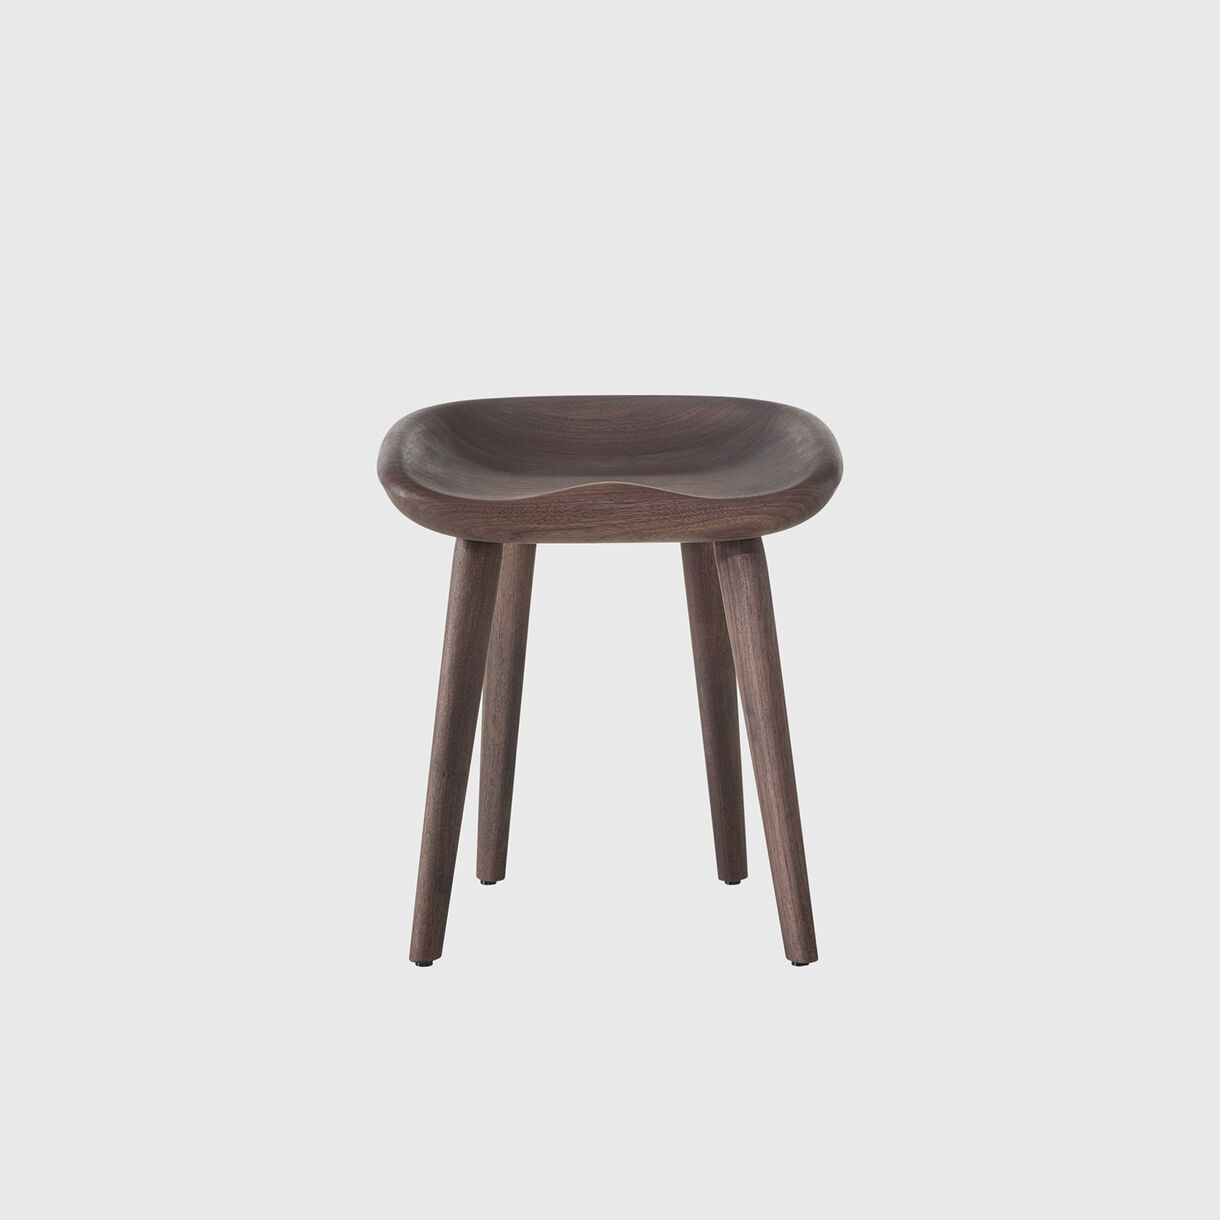 Tractor Stool, Low Stool Height, Walnut, Black Oiled